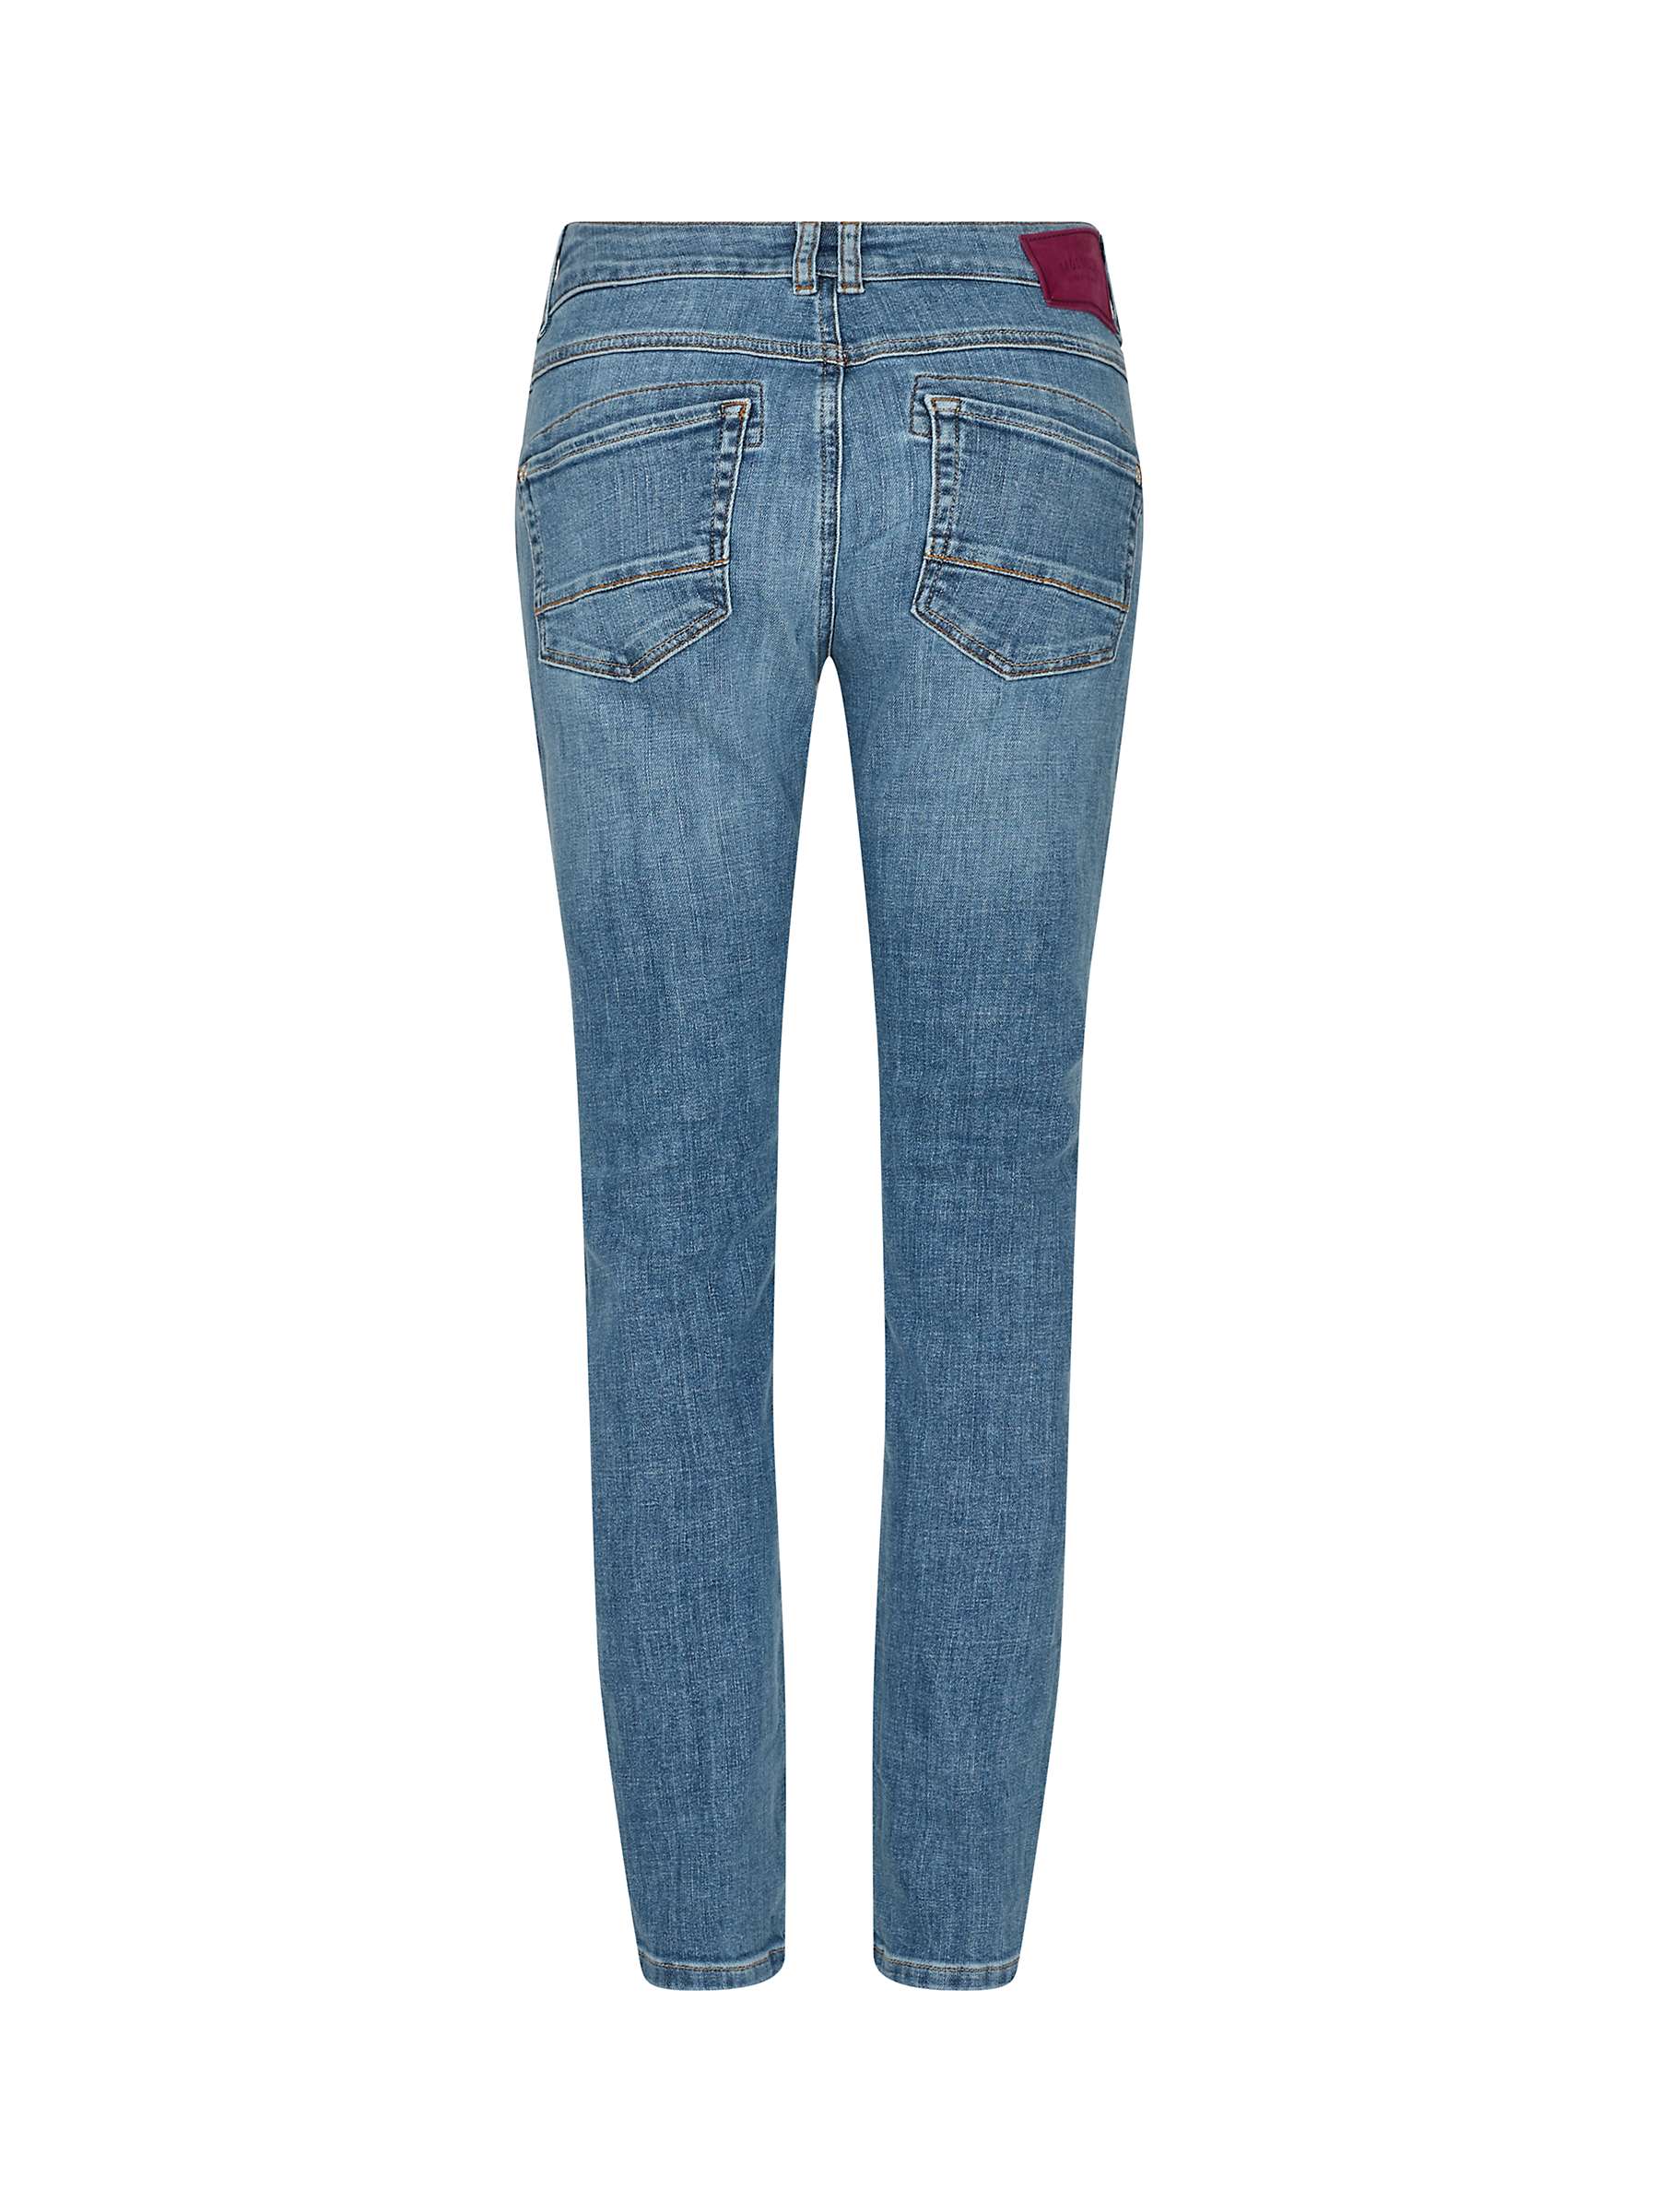 Buy MOS MOSH Naomi Ave Mid Rise Regular Jeans, Blue Online at johnlewis.com